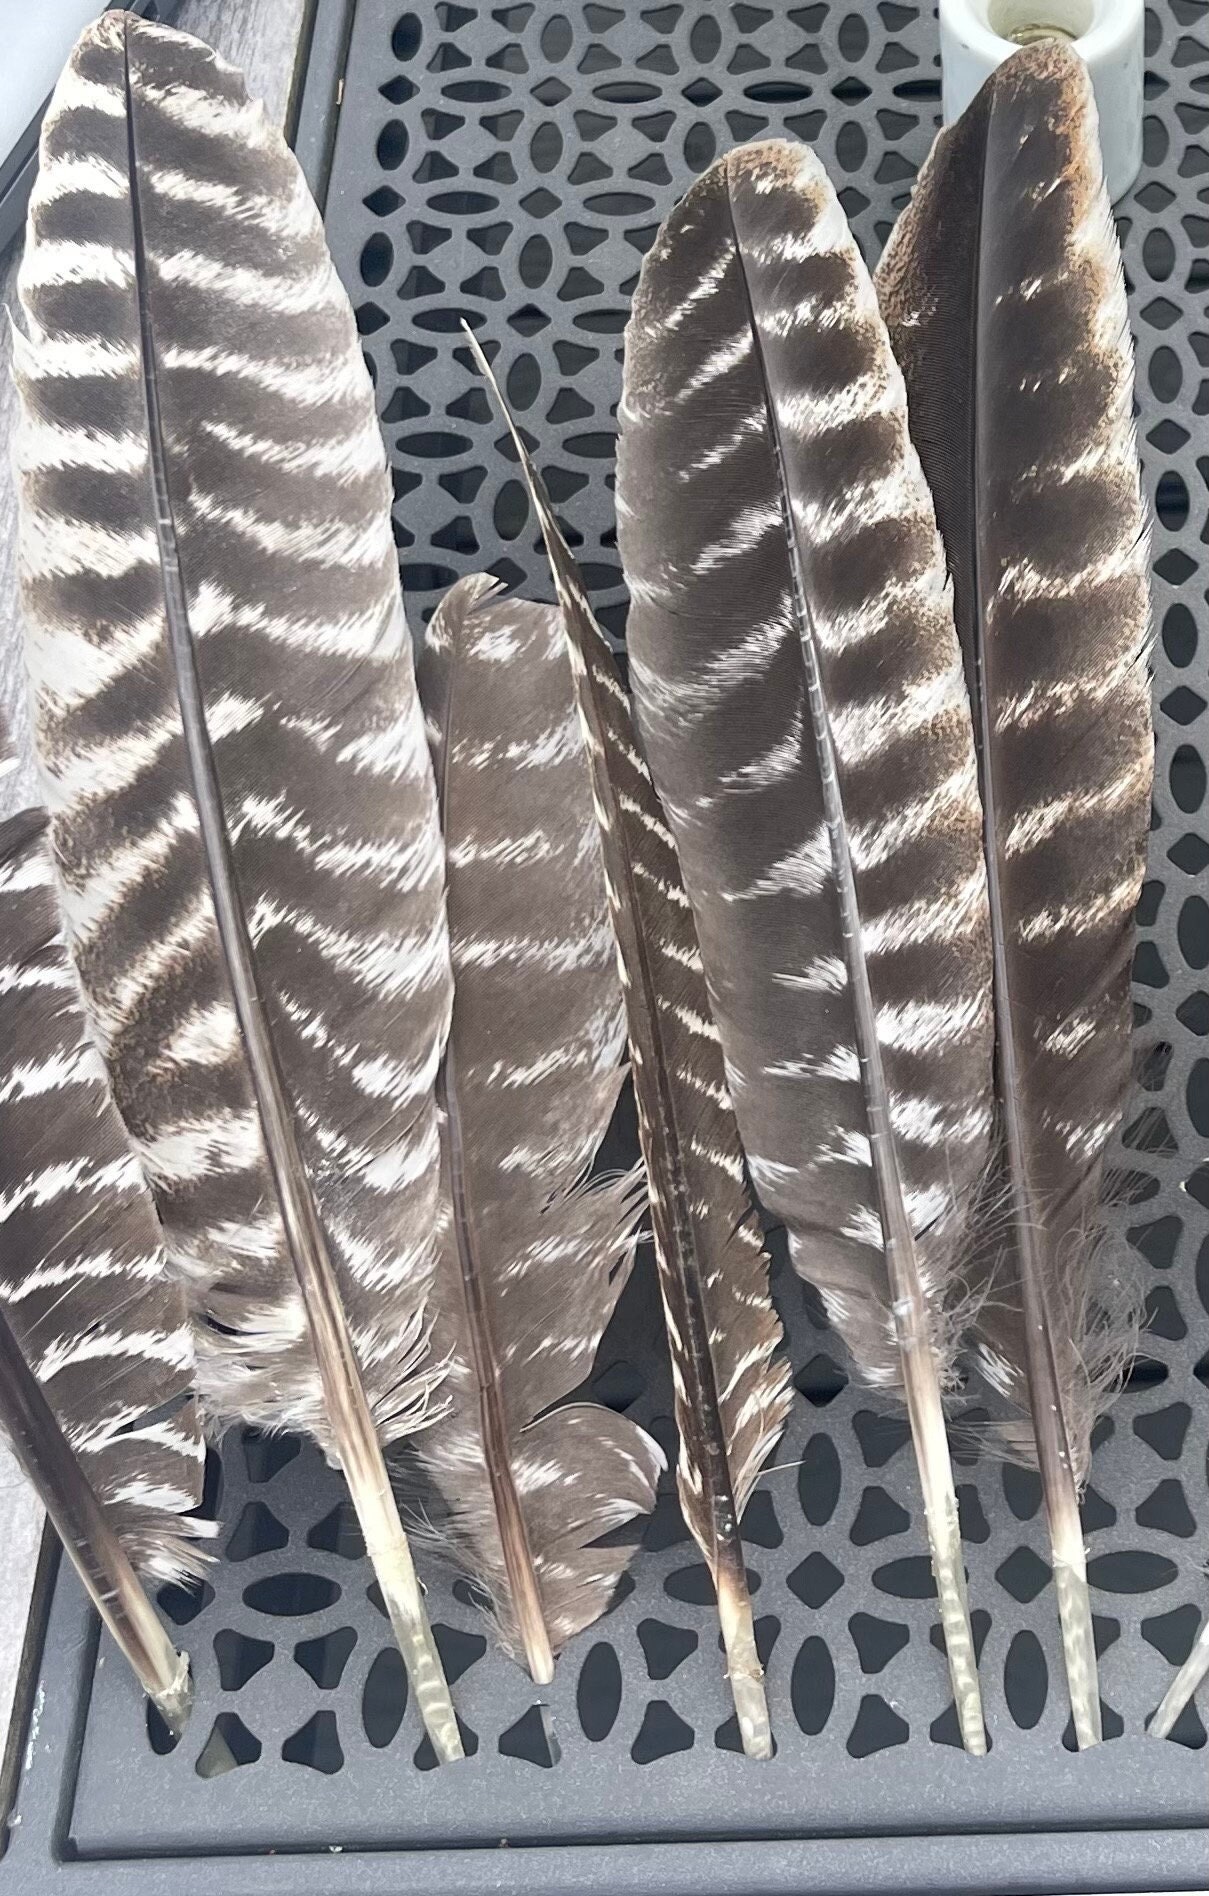 6 Pieces - Natural Brown Wild Tom Turkey Pulled Pointers Primary Wing Quill  Feathers